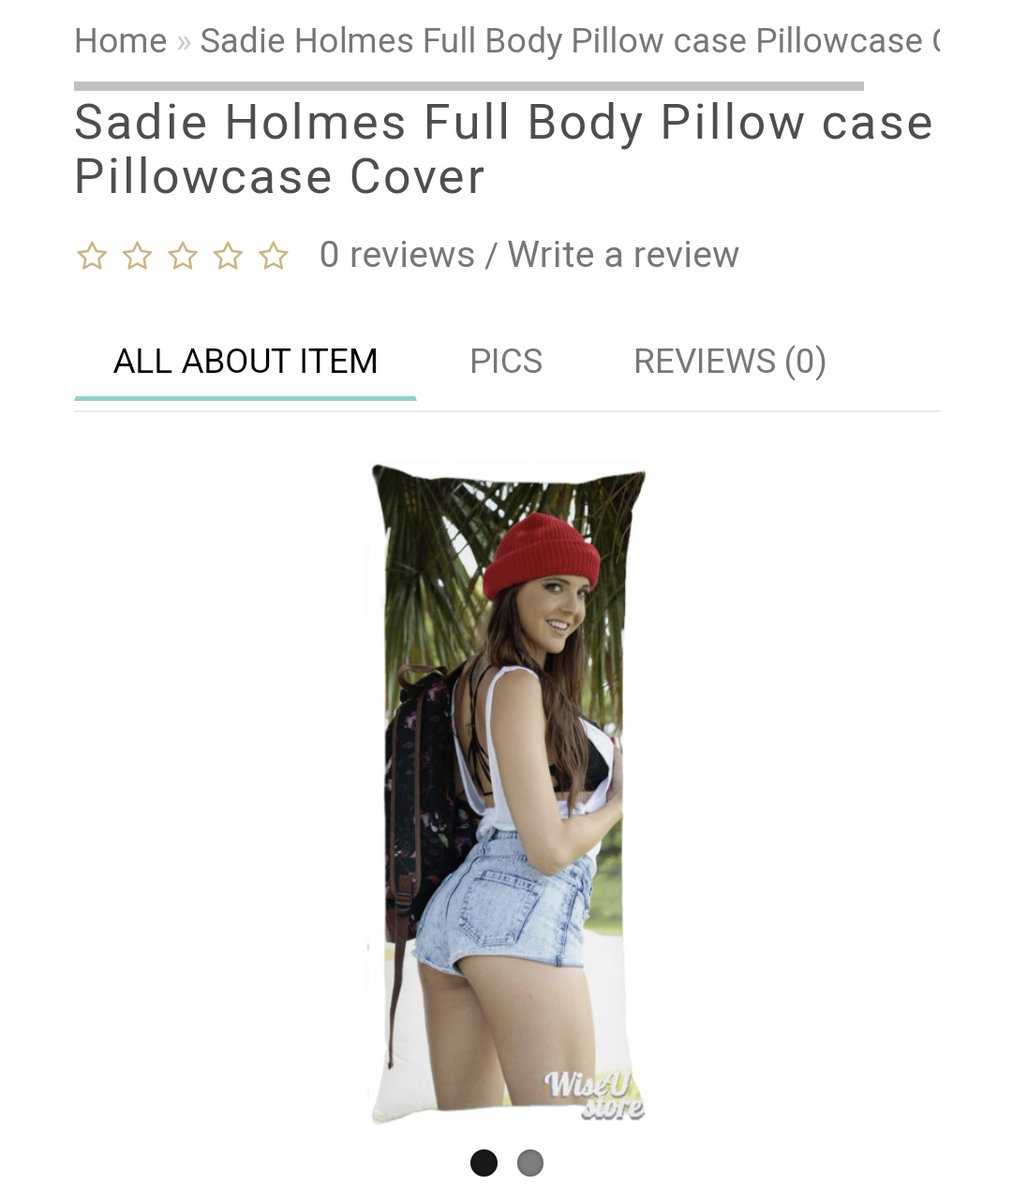 Great, someone is ripping off my @RealRKofficial photo and making body pillows. First sex dolls, now this lol.